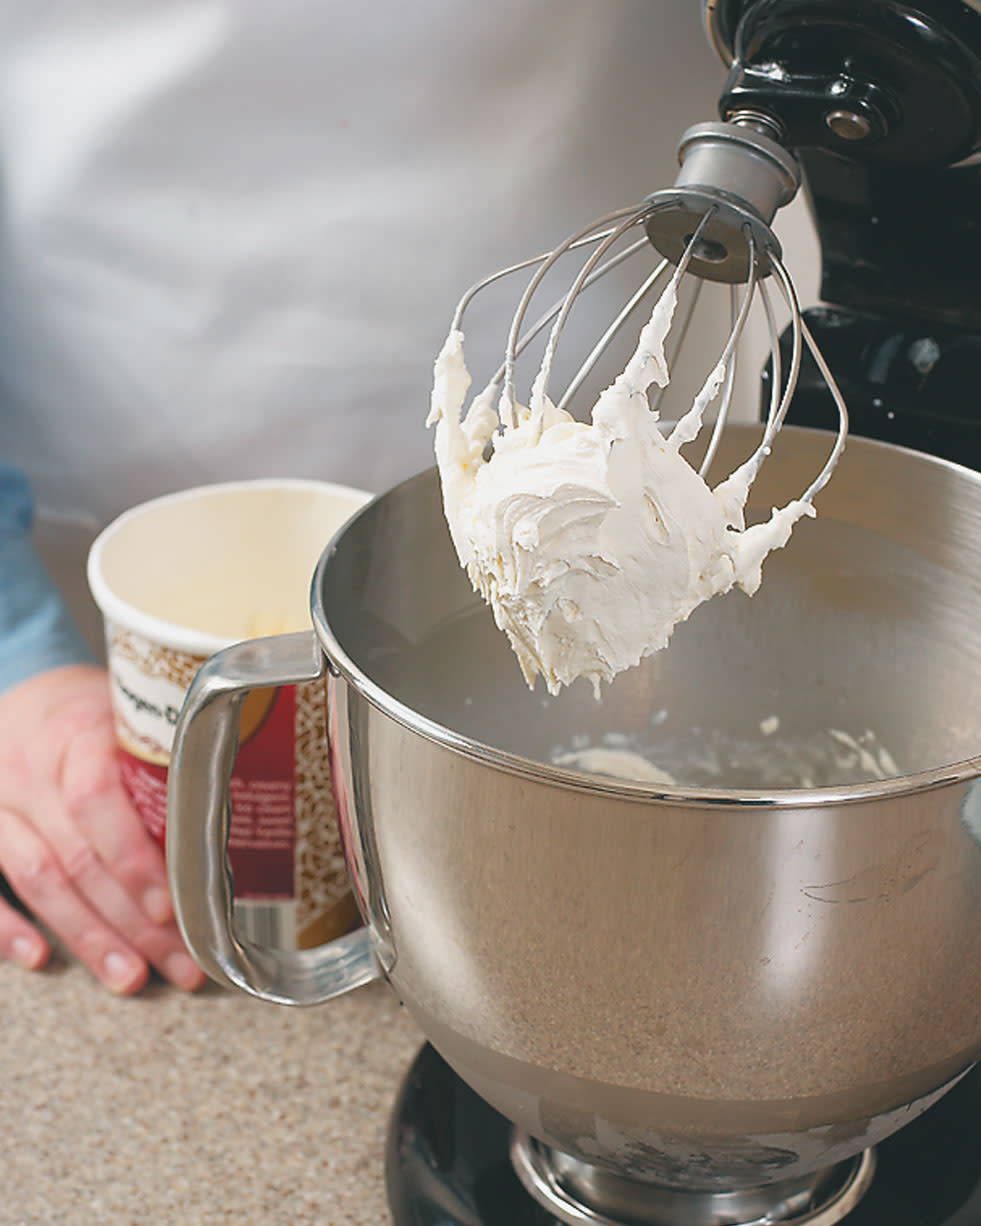 A technique for Whipping cream with mixer